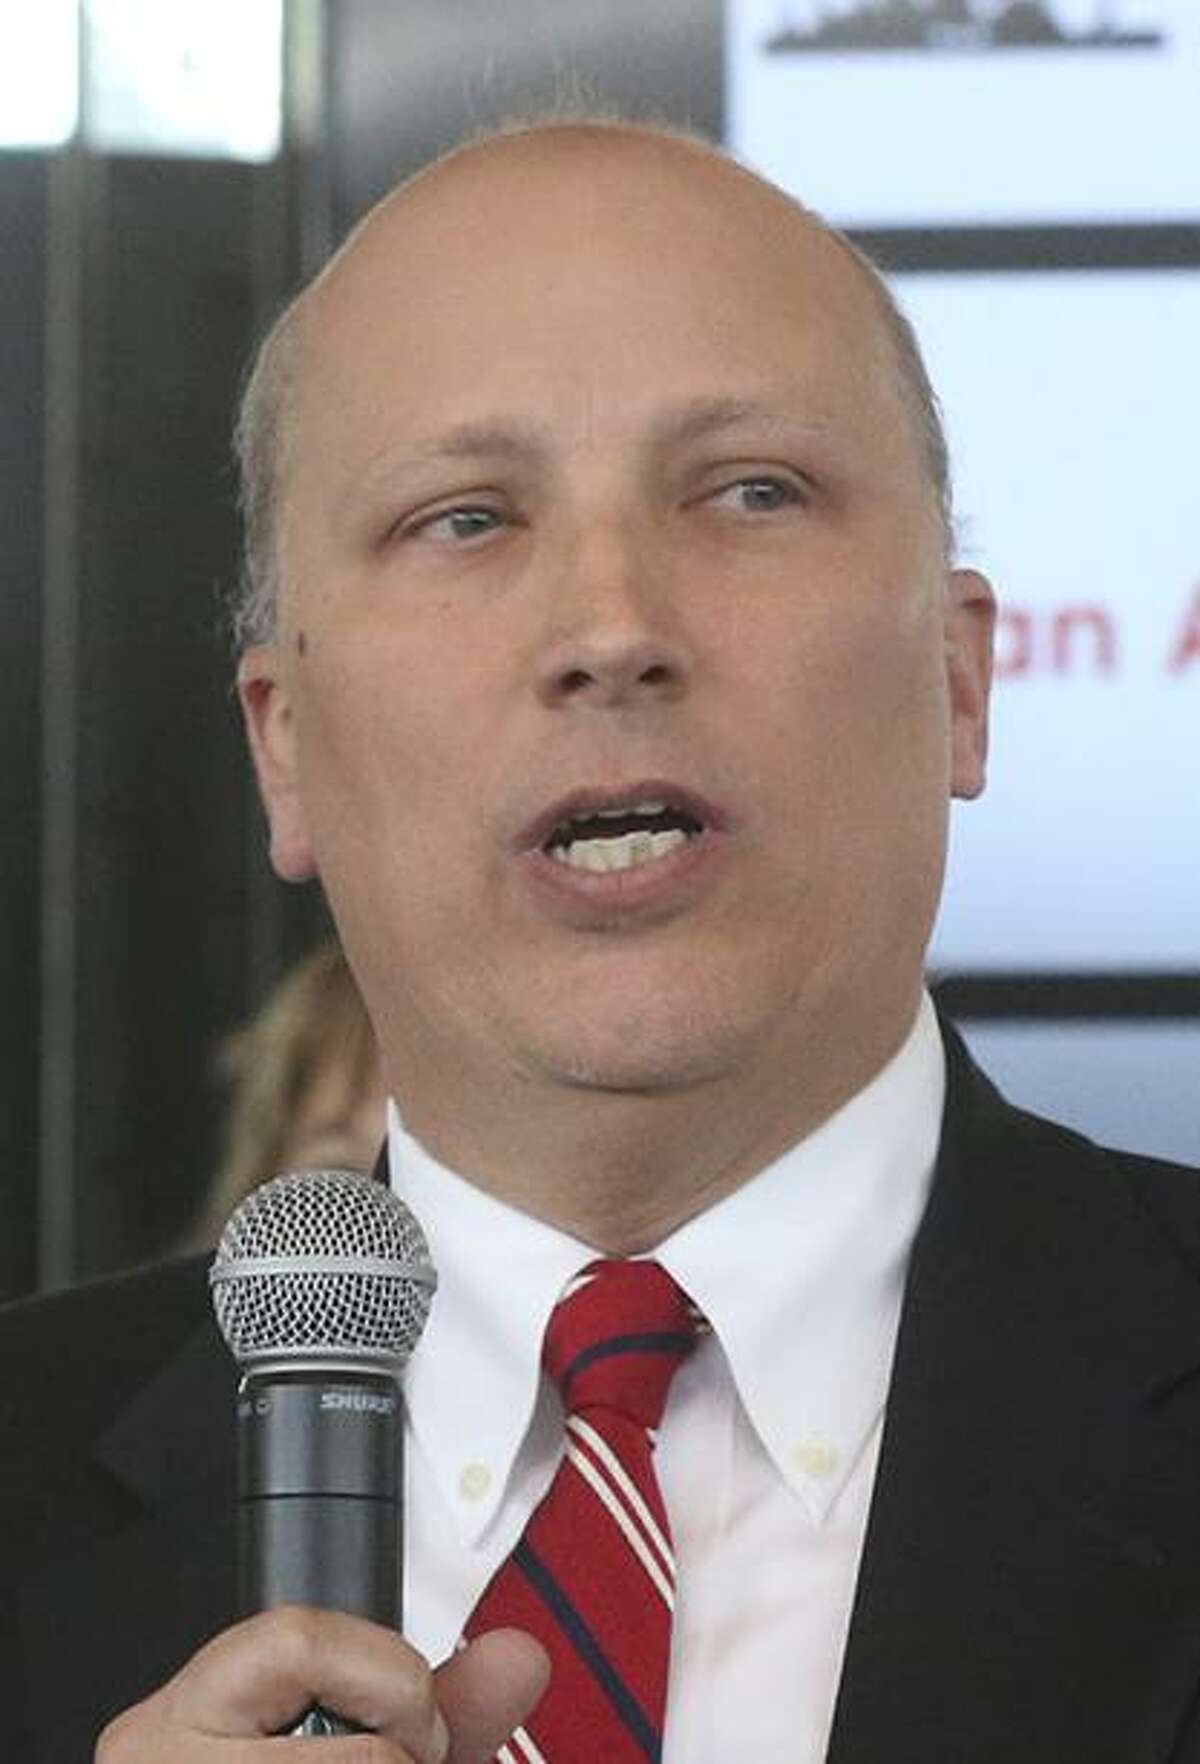 Congressional District 21 candidate Chip Roy (foreground, holding microphone) speaks Thursday January 11, 2018 at the Old San Francisco Steakhouse during a forum held during a meeting of the San Antonio Republican Women. The forum introduced 15 candidates running for the seat held in Congressional District 21 held by Representative Lamar Smith.